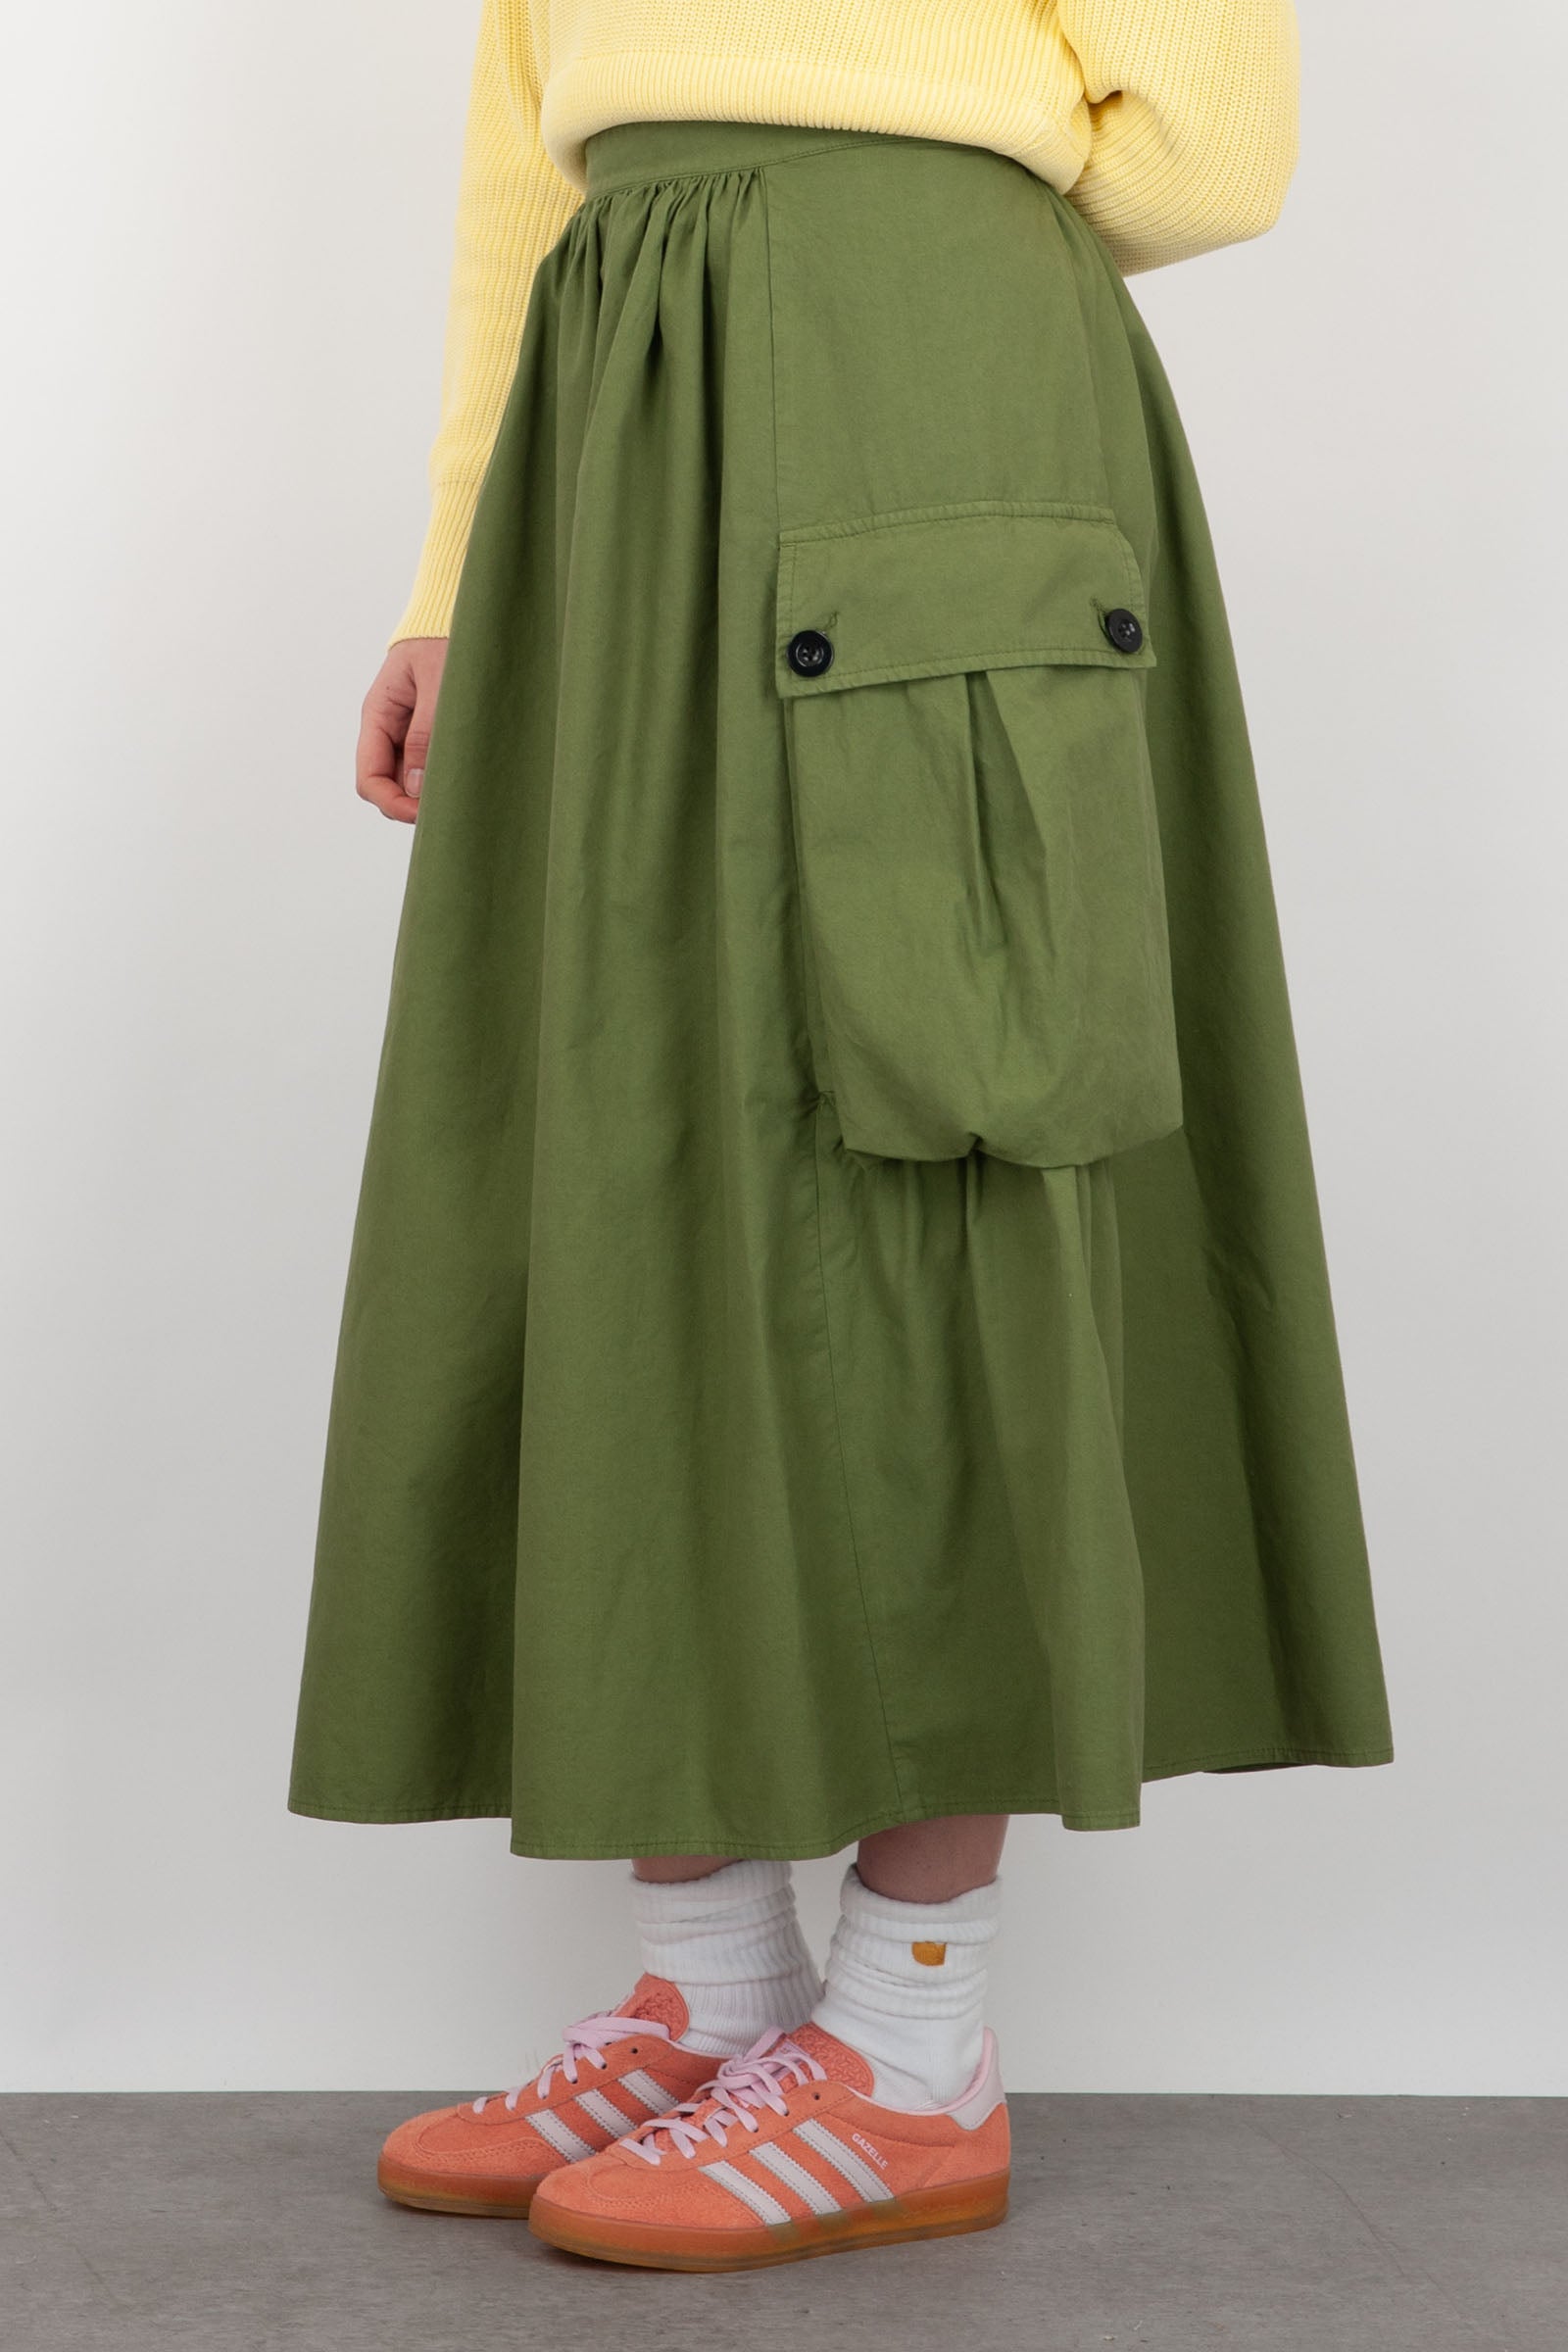 Department Five Selma Skirt in Military Green Cotton - 4